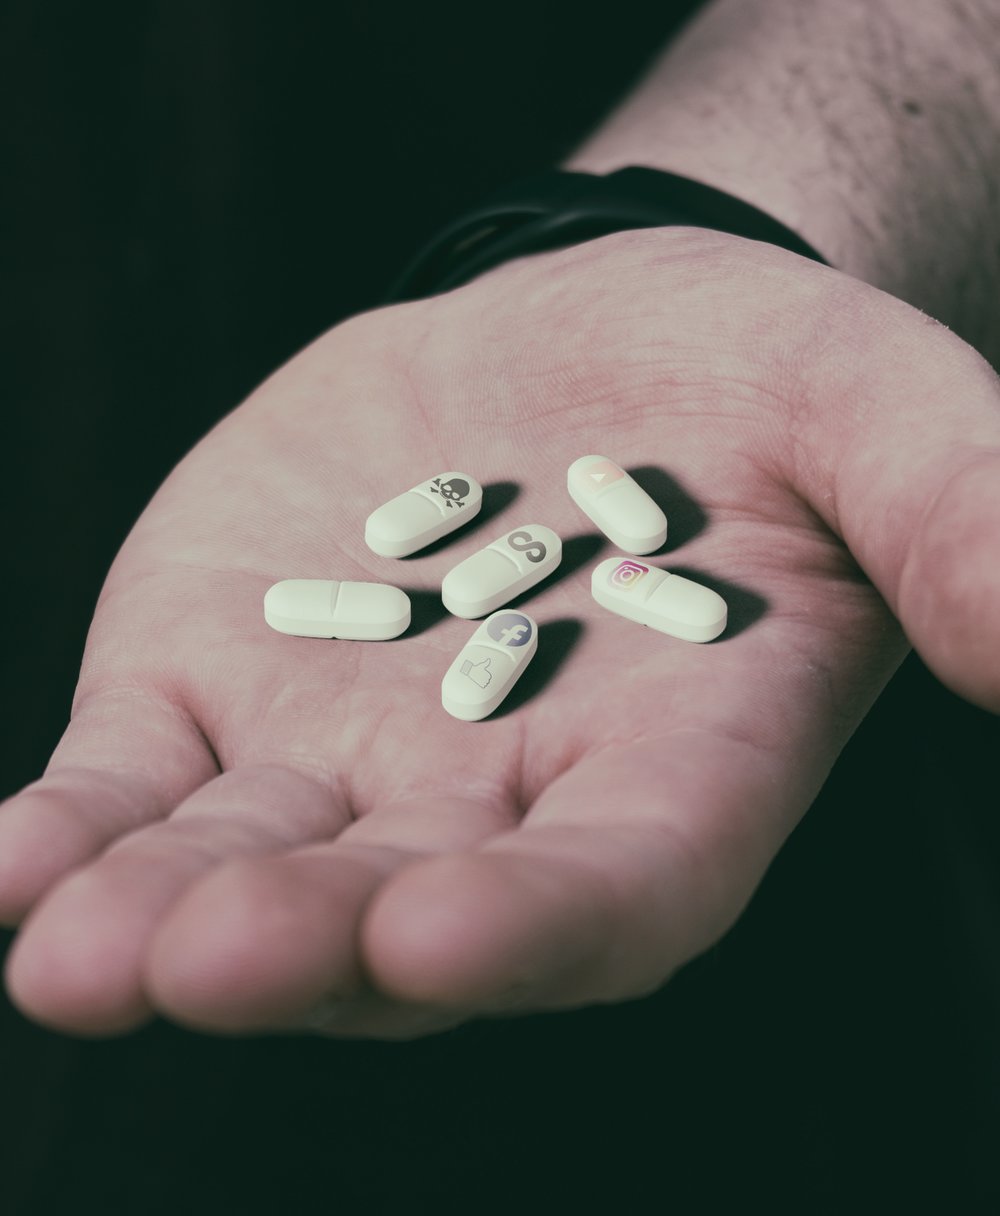 Before taking antidepressants, make sure to consult with your doctor first to determine the dosage you need to take.